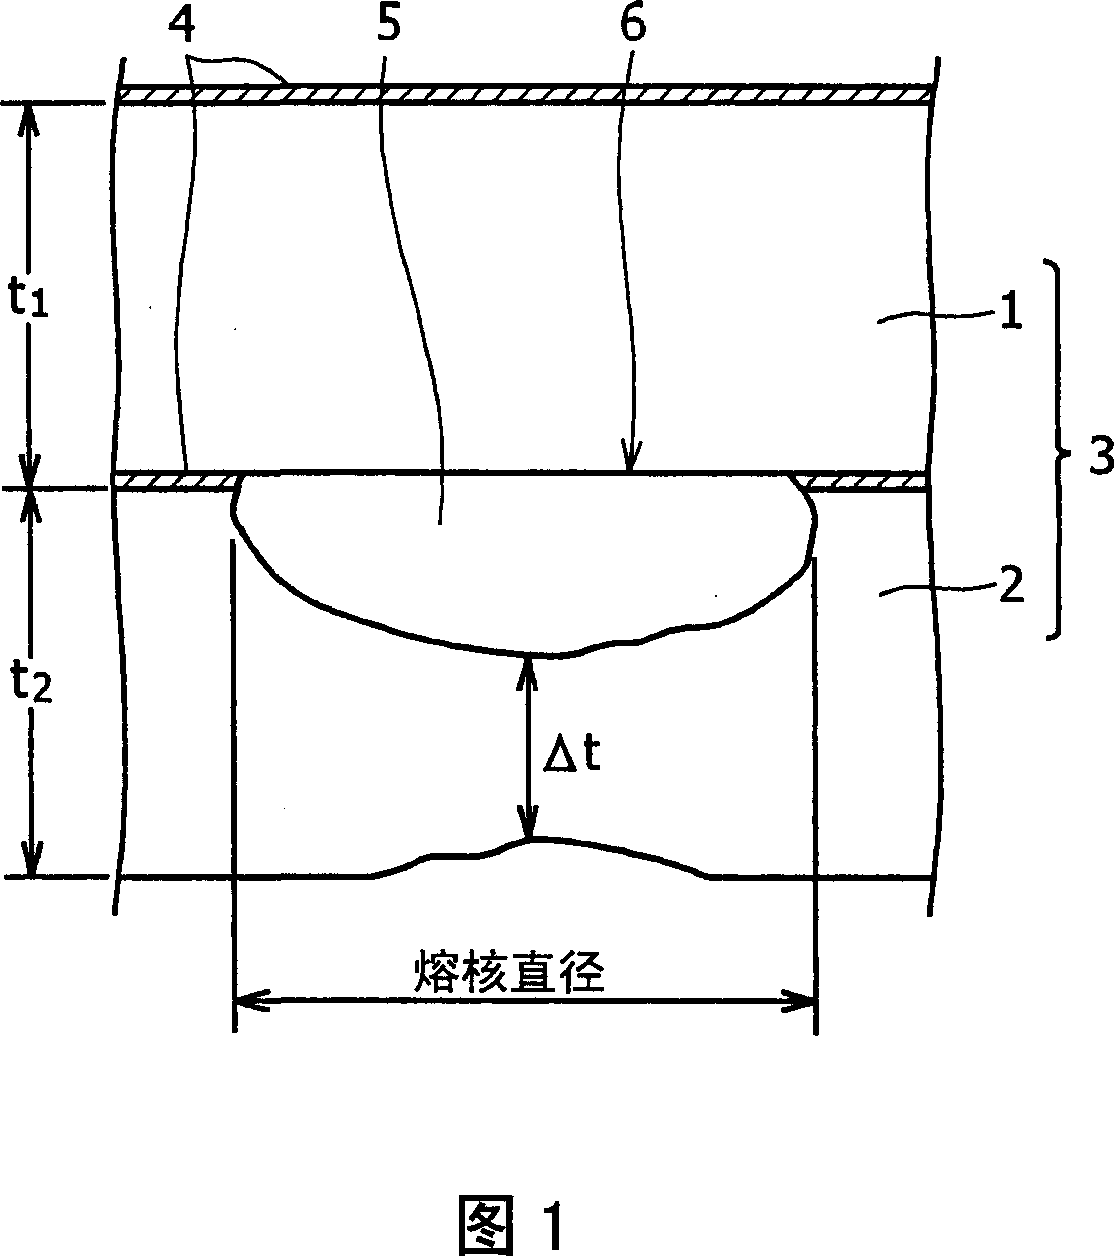 Joined body of different materials of steel material and aluminum material and method for joining the same